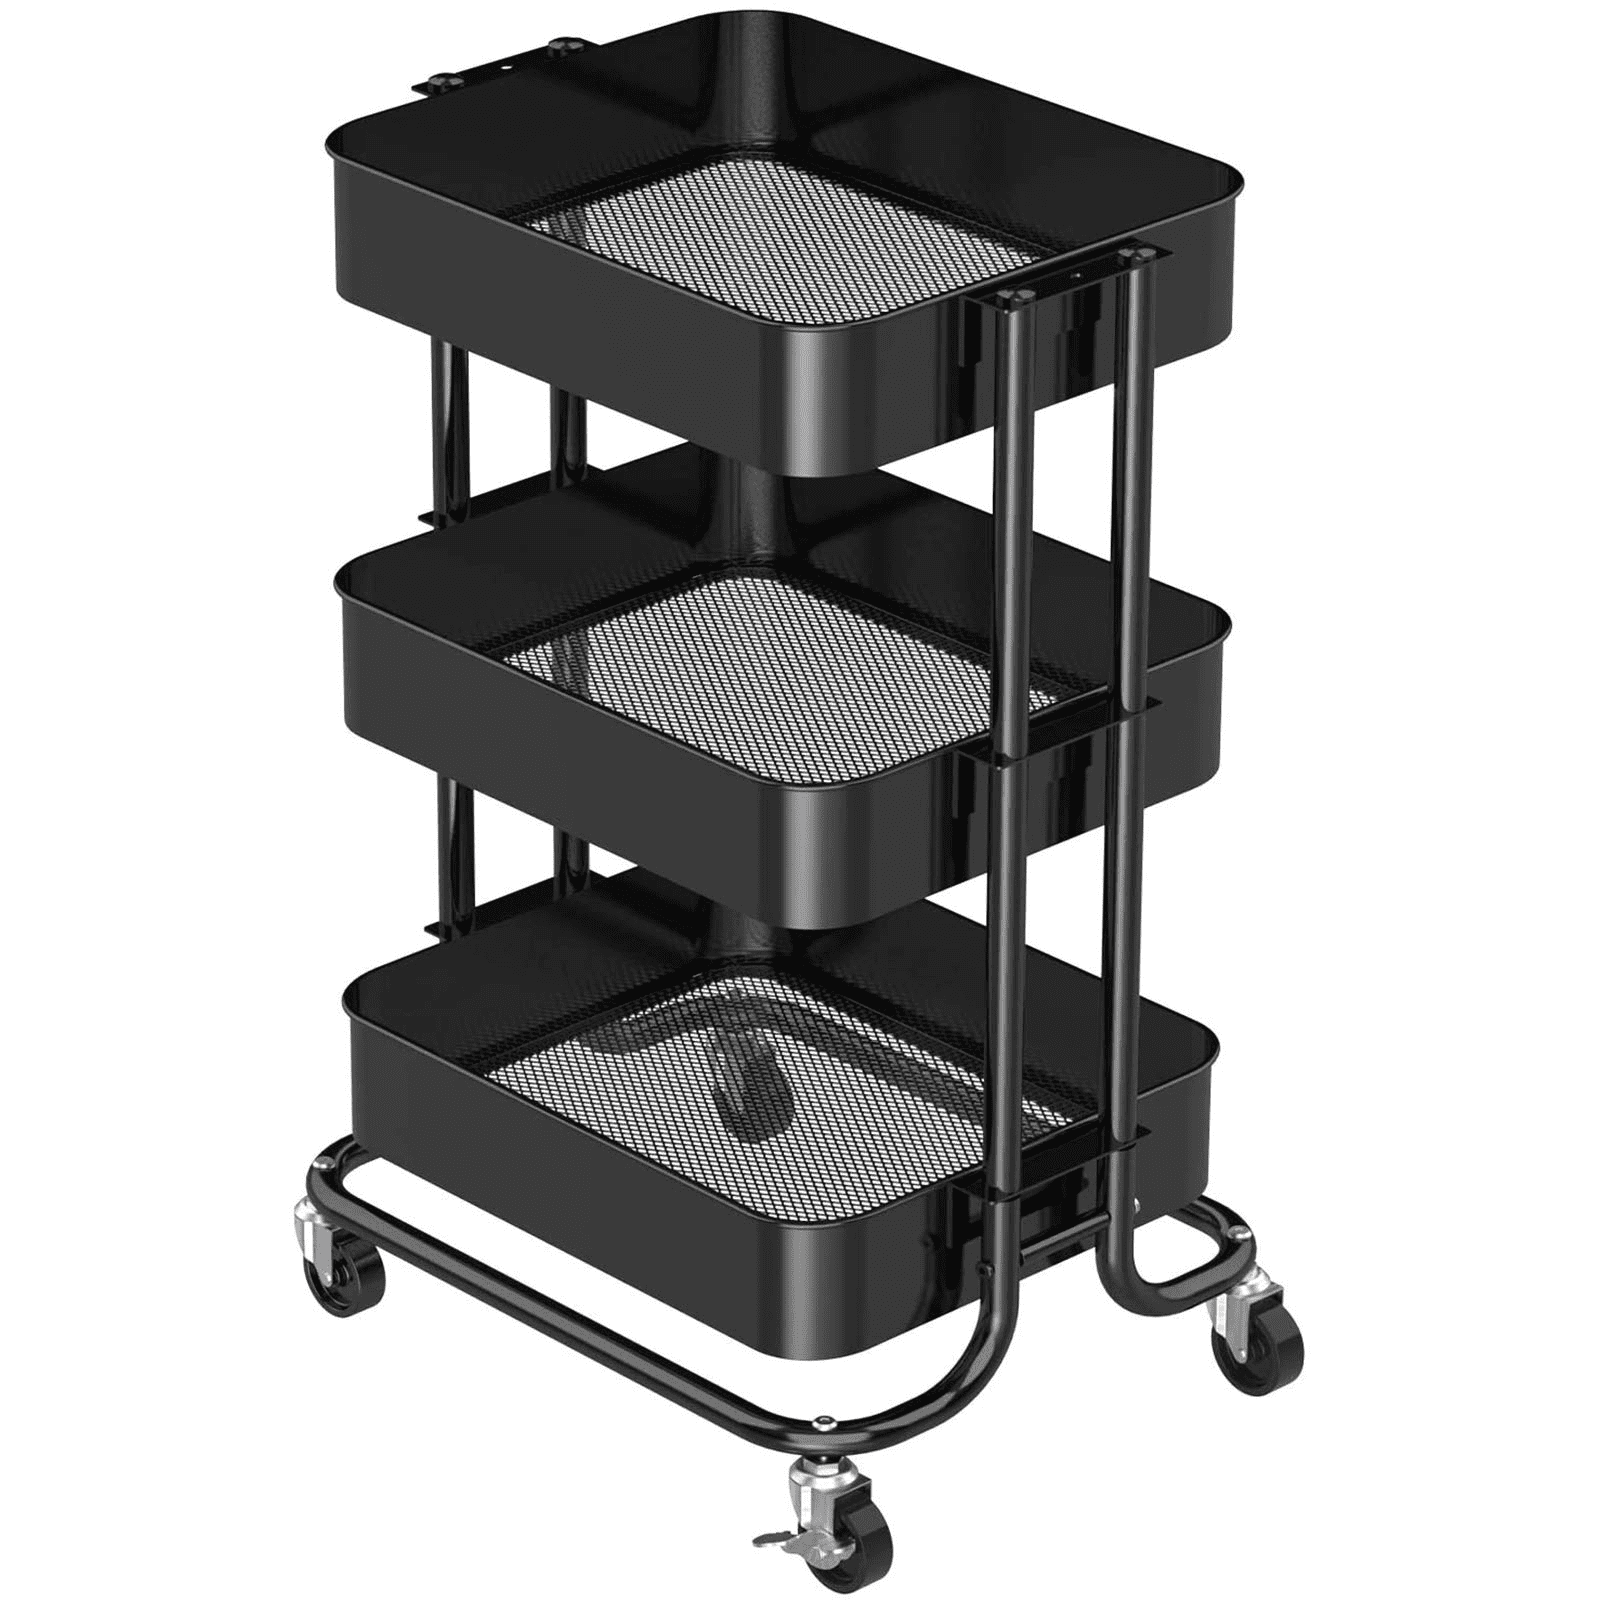 DEE Multi-Function Shopping Trolleys,Kitchen Storage Utility-Carts Padded Sea Can Push The Scooter Aluminum Alloy Folding Four-Wheel Shopping Cart Elderly Walking Assist Carts,Black,51X60Cm